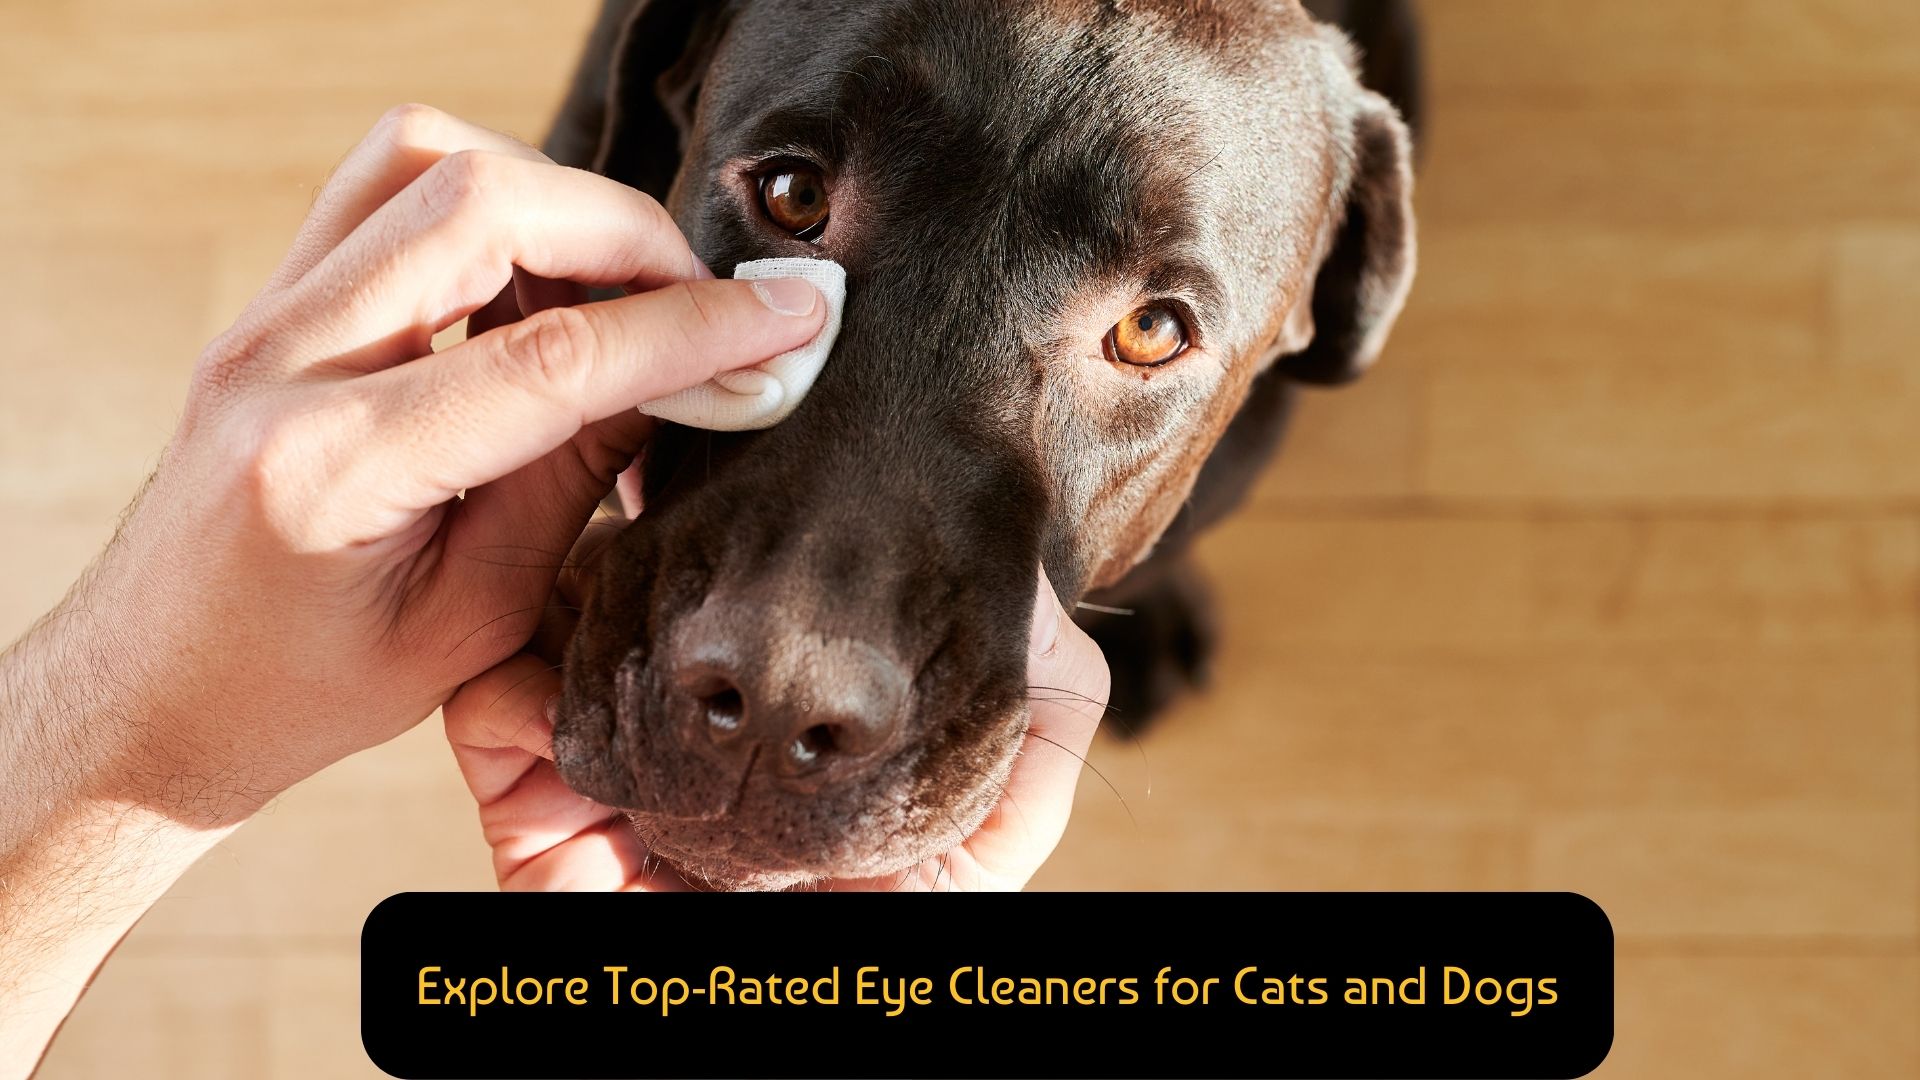 Explore-Top-Rated-Eye-Cleaners-for-Cats-and-Dogs